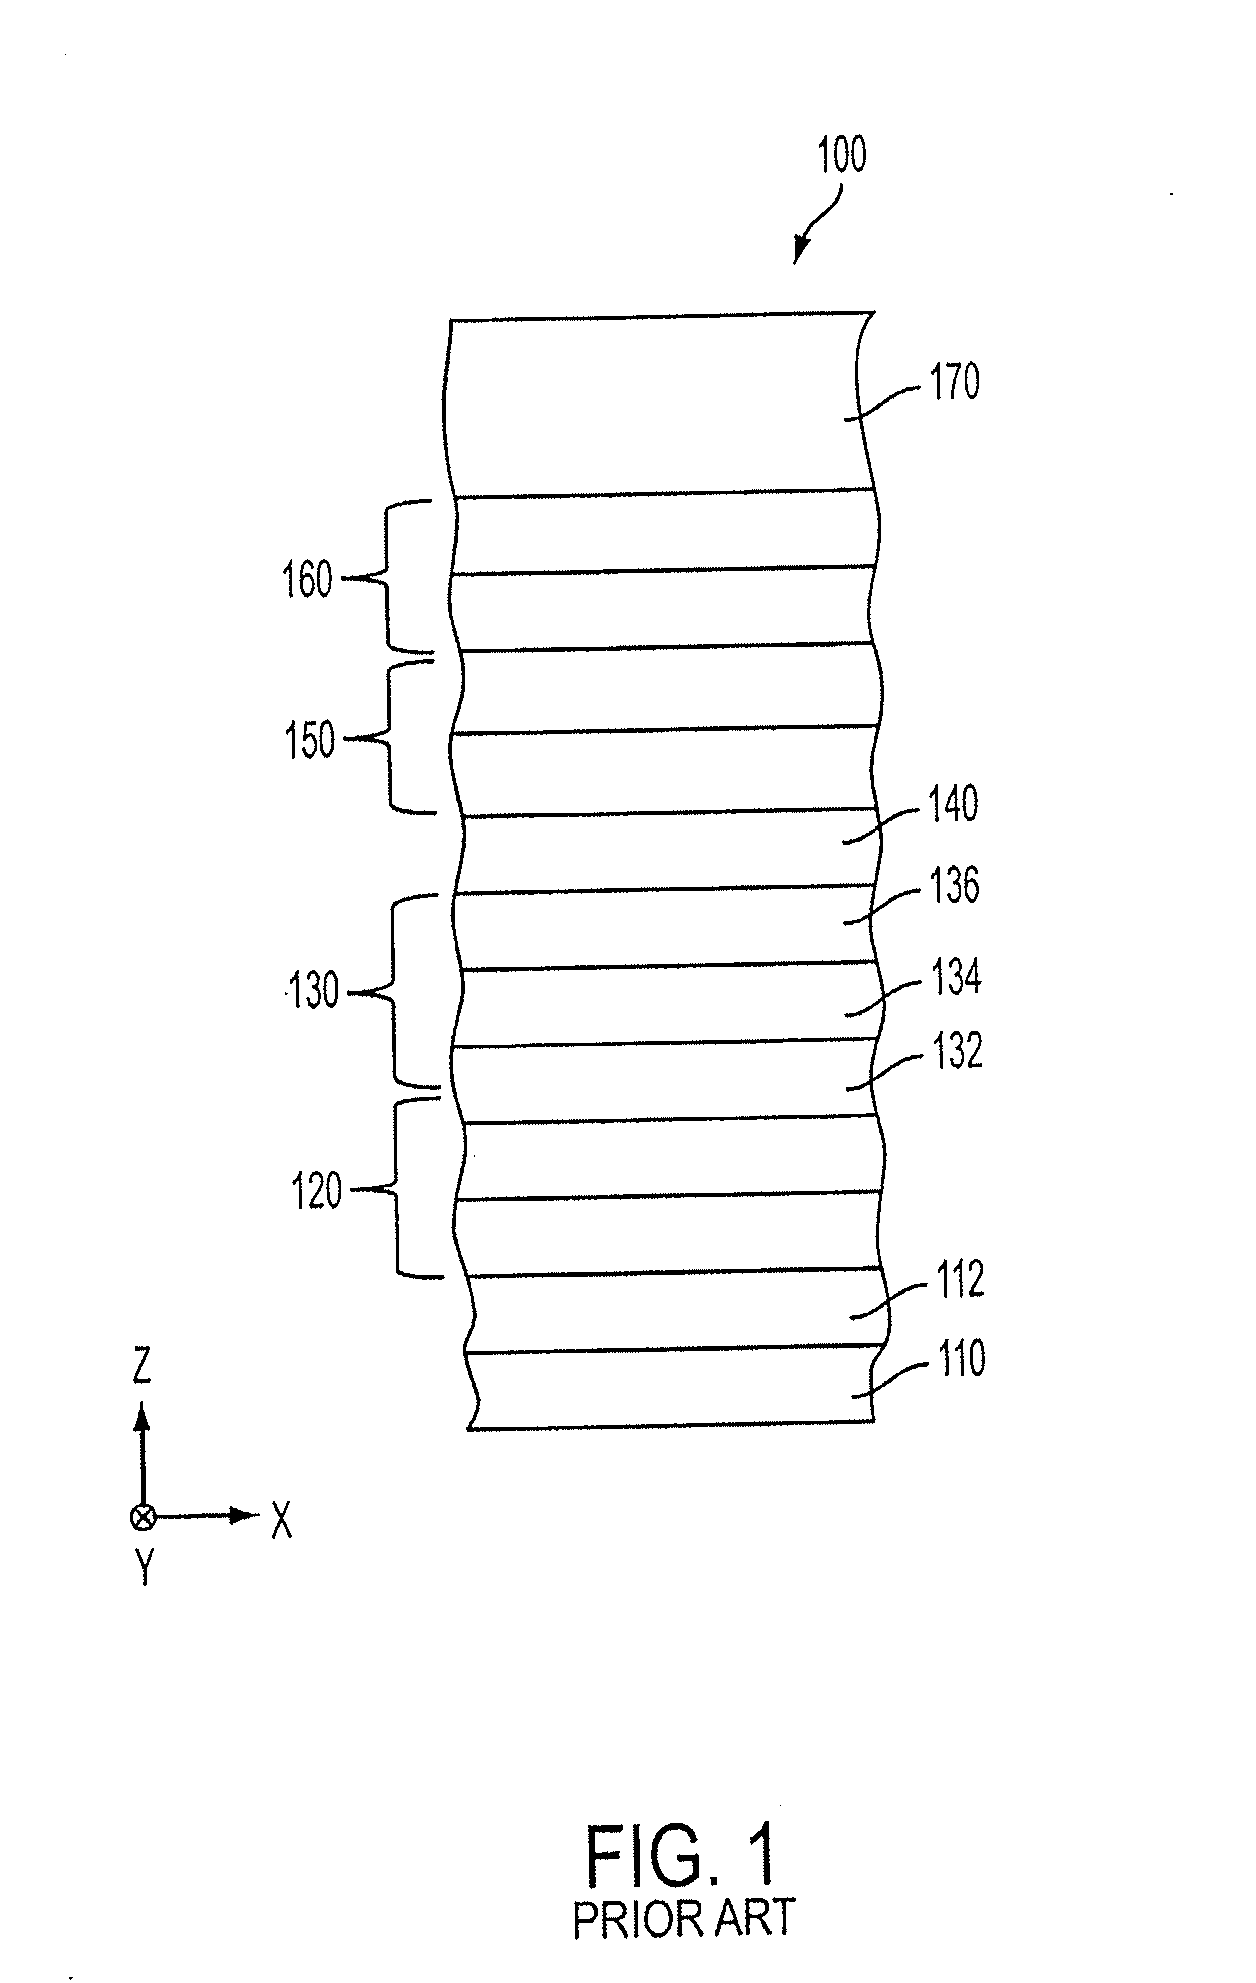 Magnetic tunnel junction structure for MRAM device